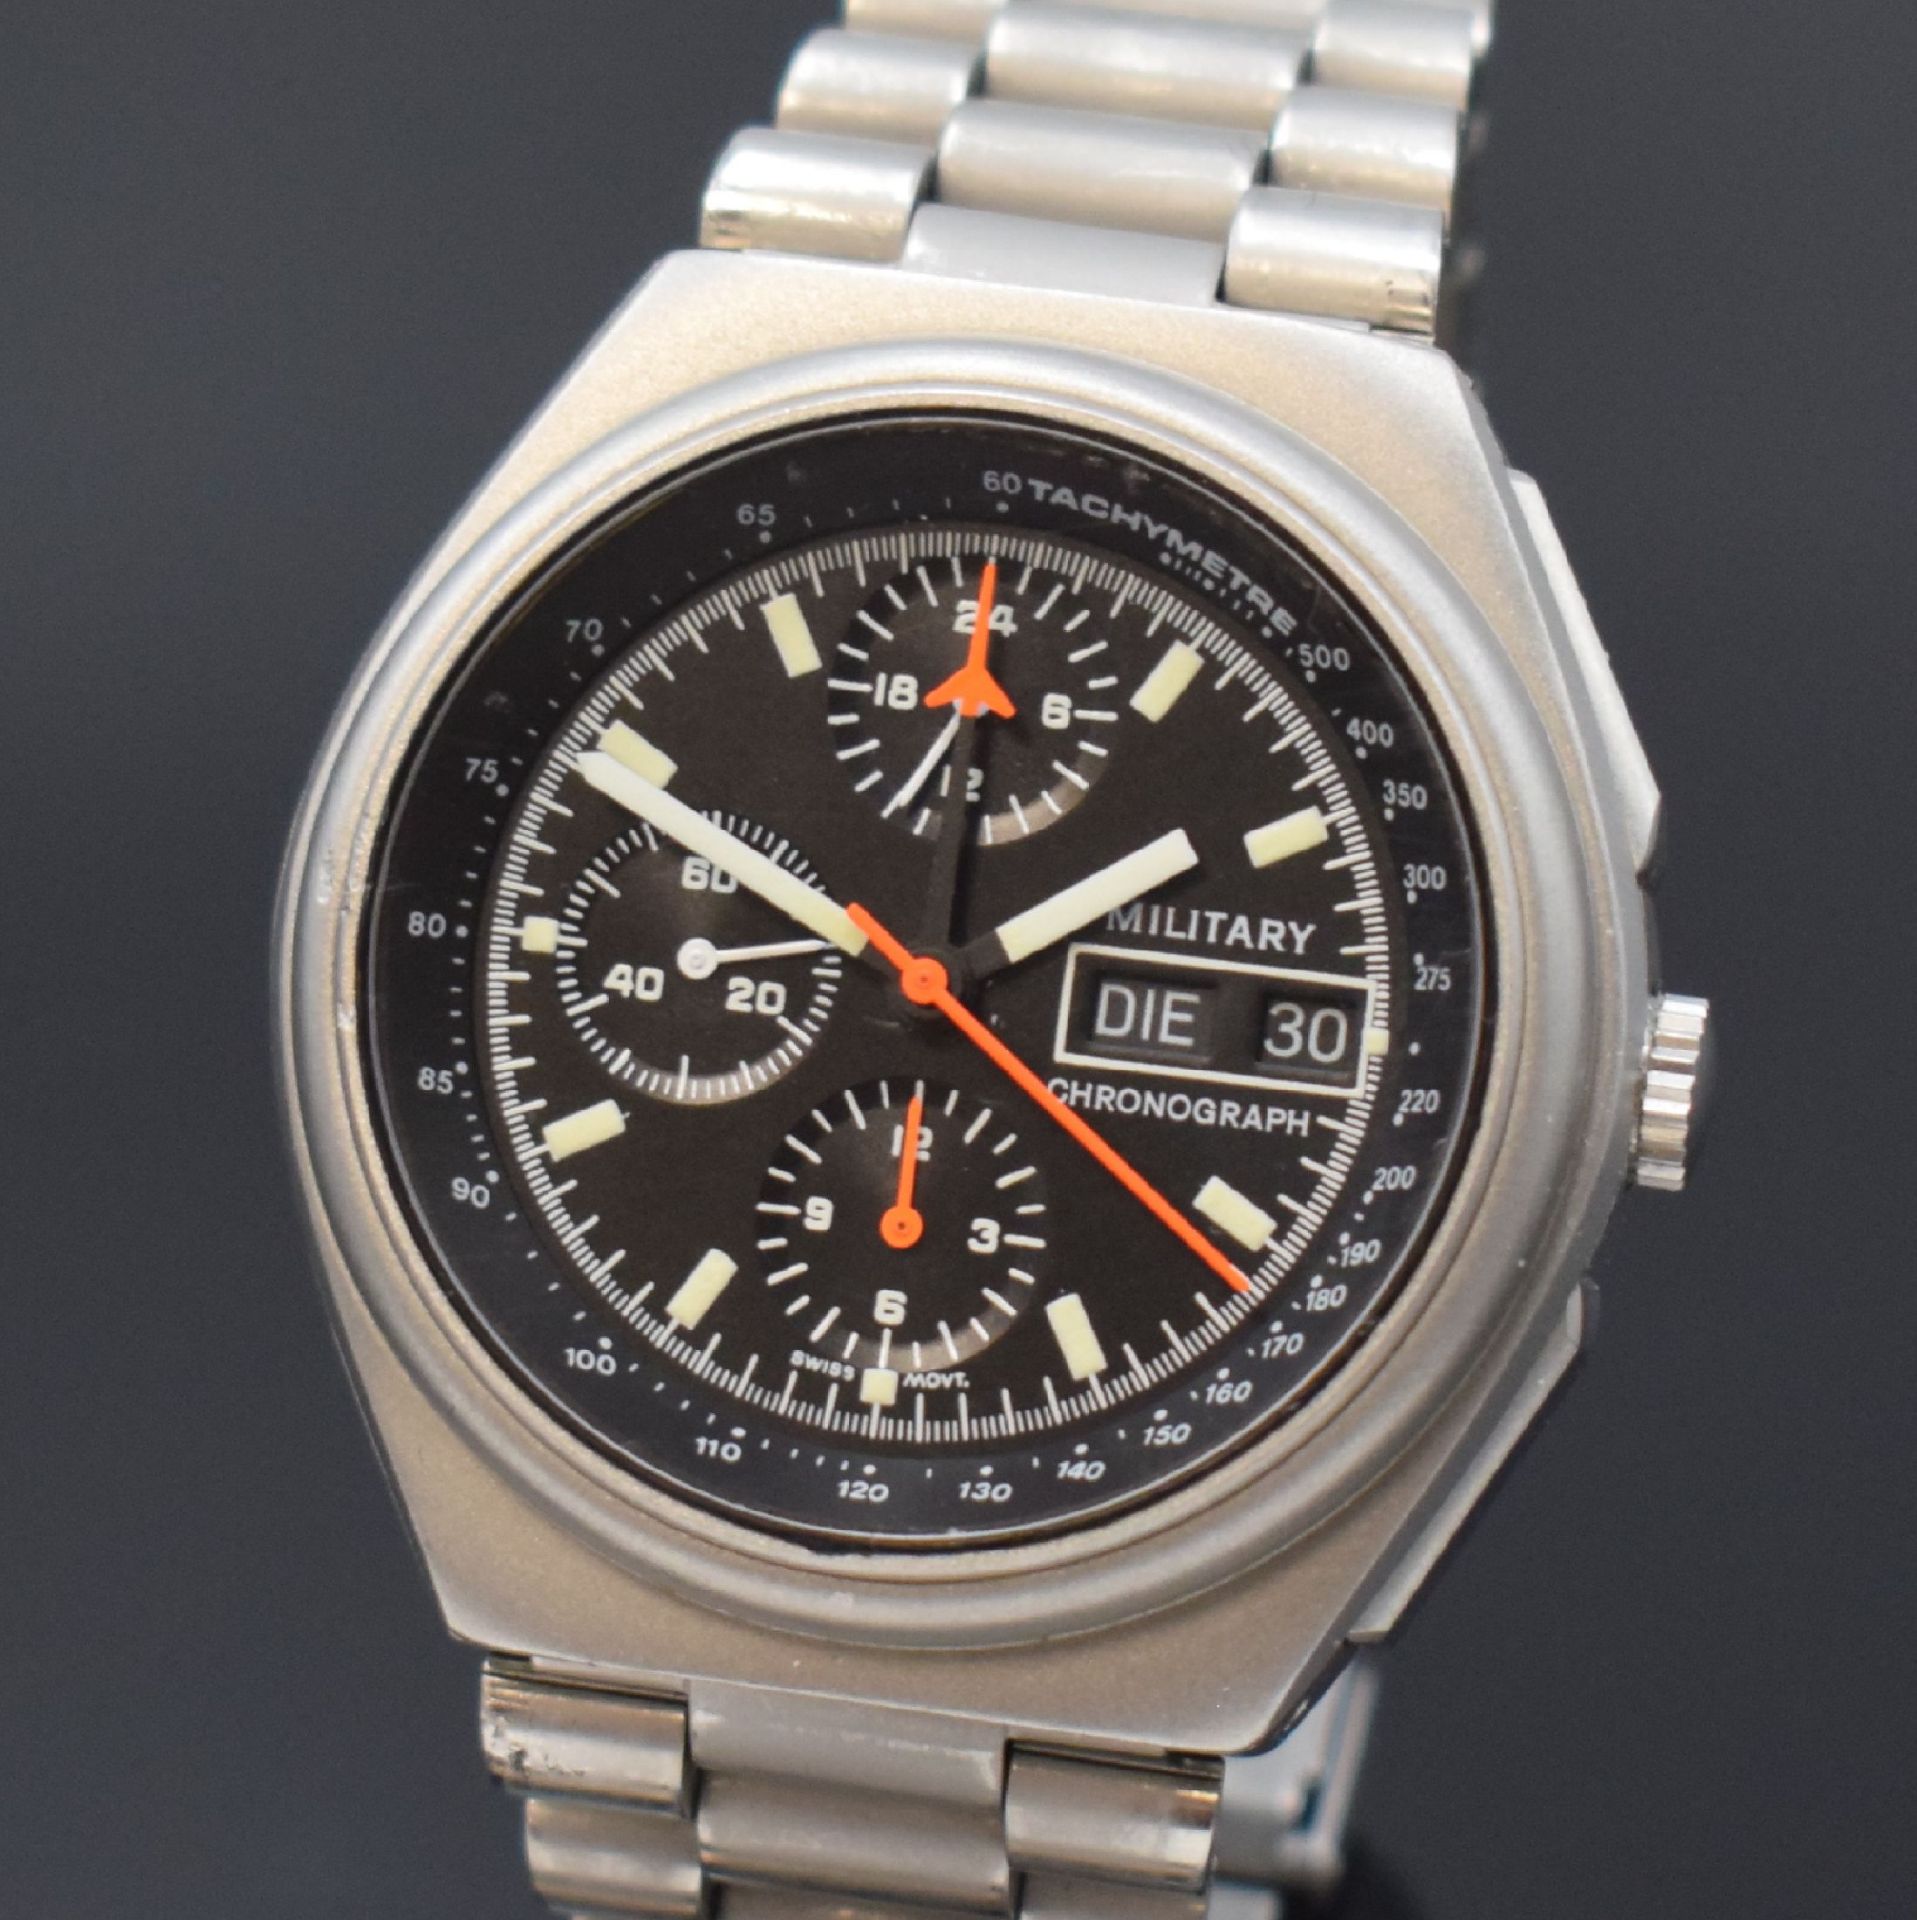 TUTIMA Military Armbandchronograph in Stahl/ Stahlband, - Image 2 of 5